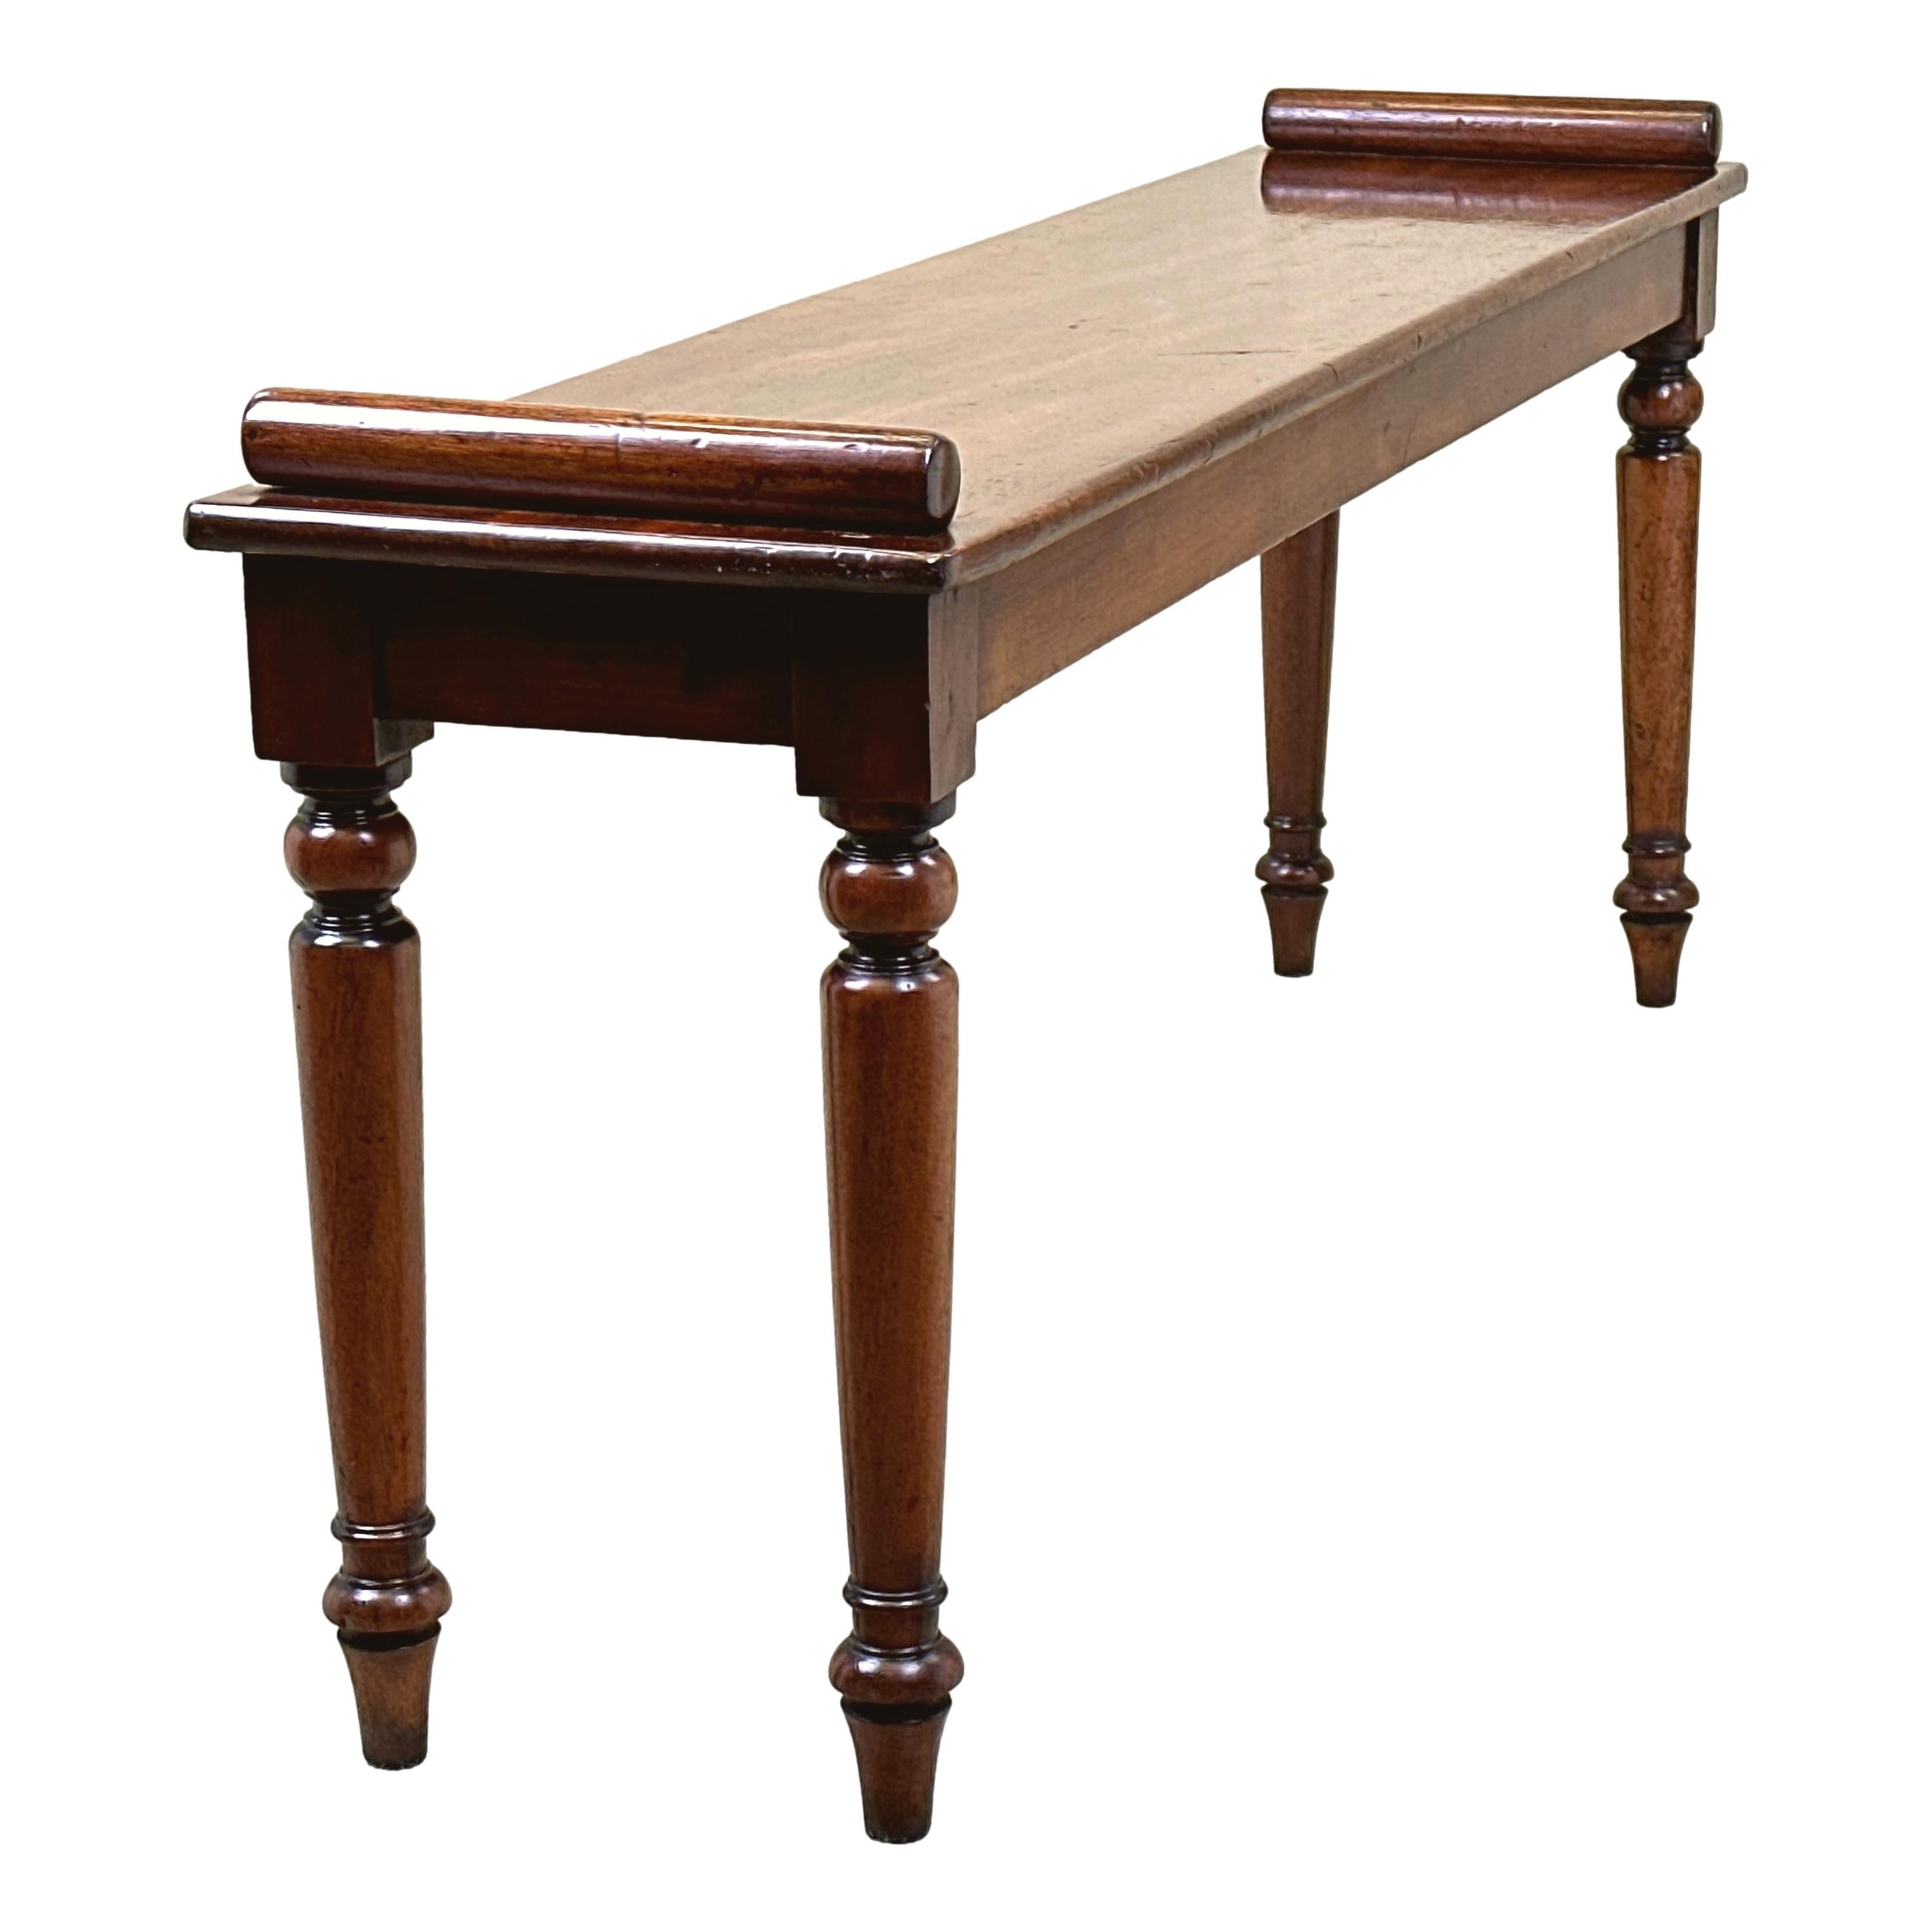 A Very Good Quality Mid 19th Century mahogany window seat, Or Hall Bench, Of Elegant Narrow Proportions, Having Well Figured Rectangular Top With Applied Turned Roll To Each End, Raised On Four Fine Turned, Tapering Legs.


Hall benches from the